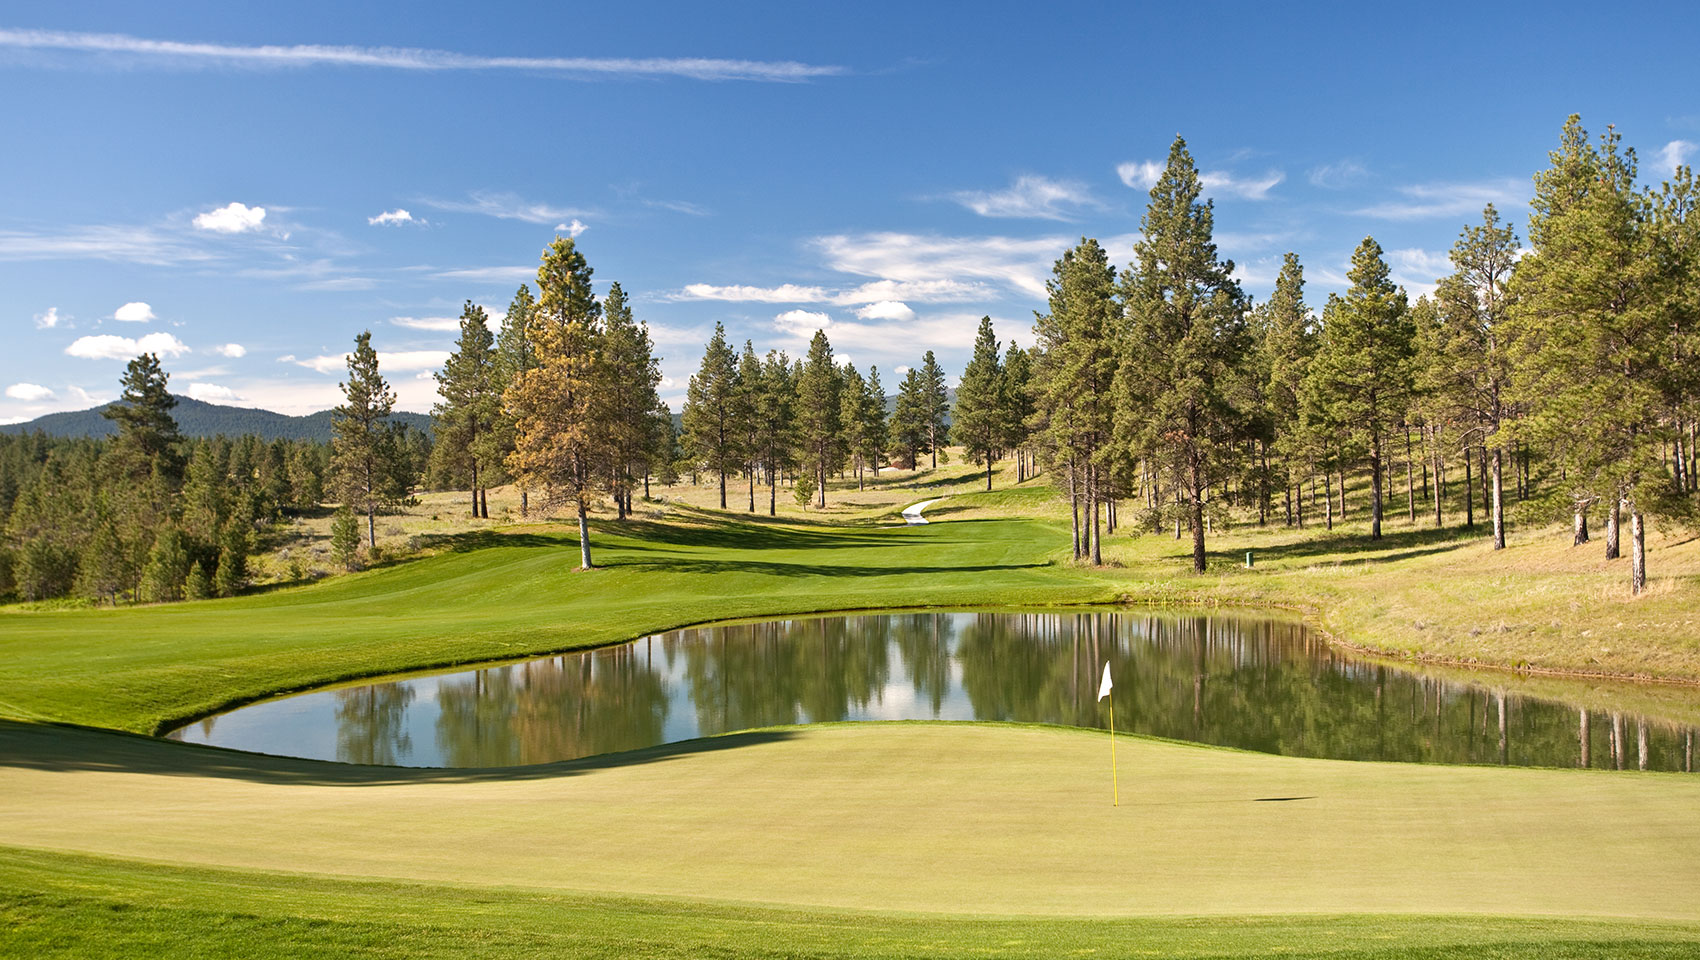 Scenic Montana golf course with view of mountains